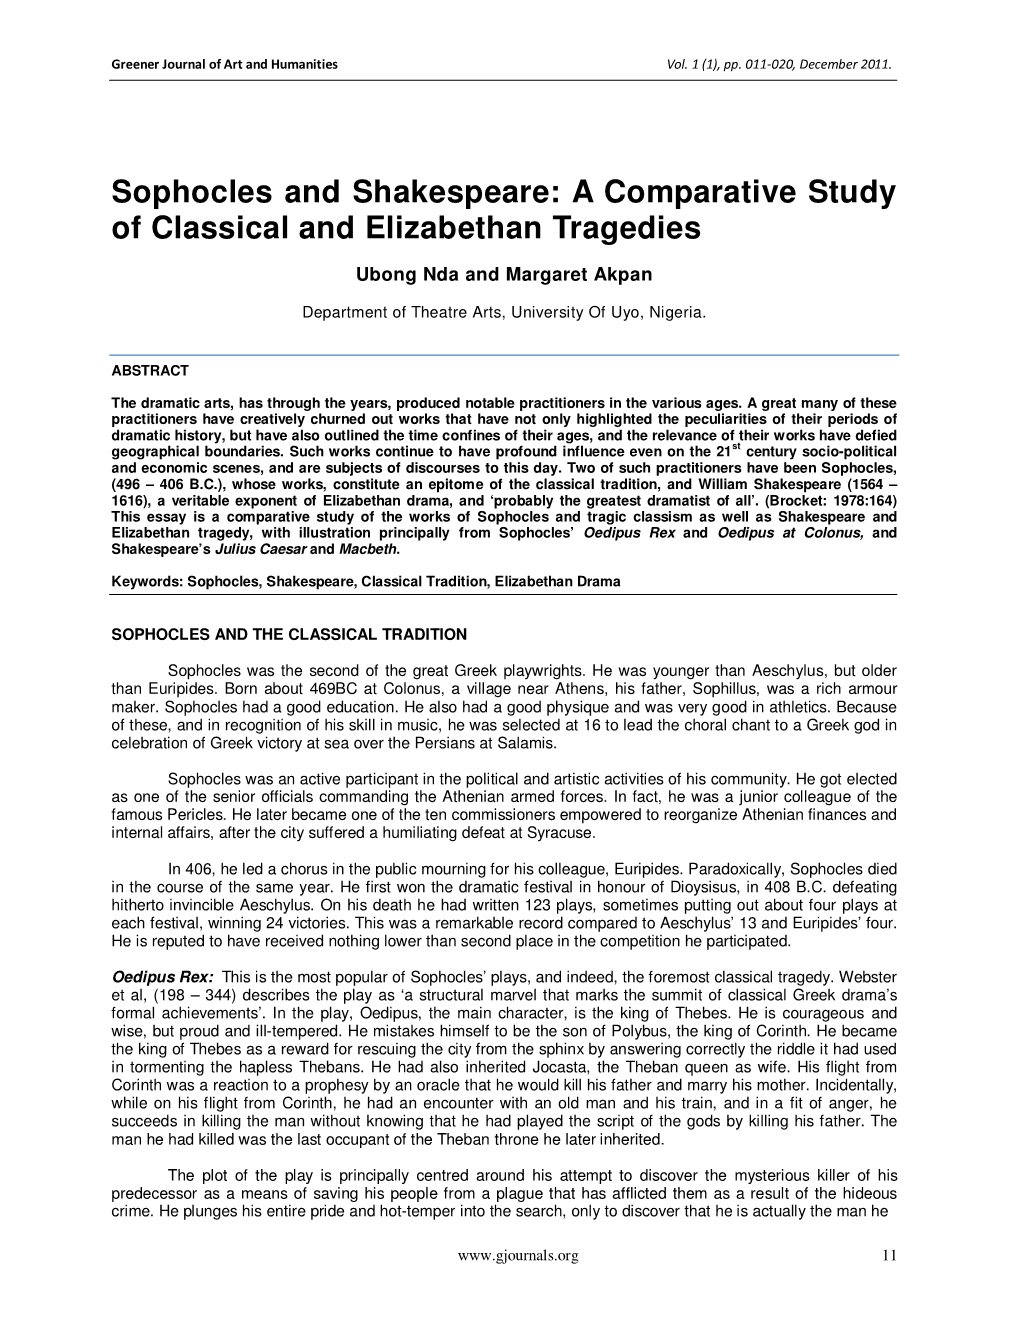 Sophocles and Shakespeare: a Comparative Study of Classical and Elizabethan Tragedies